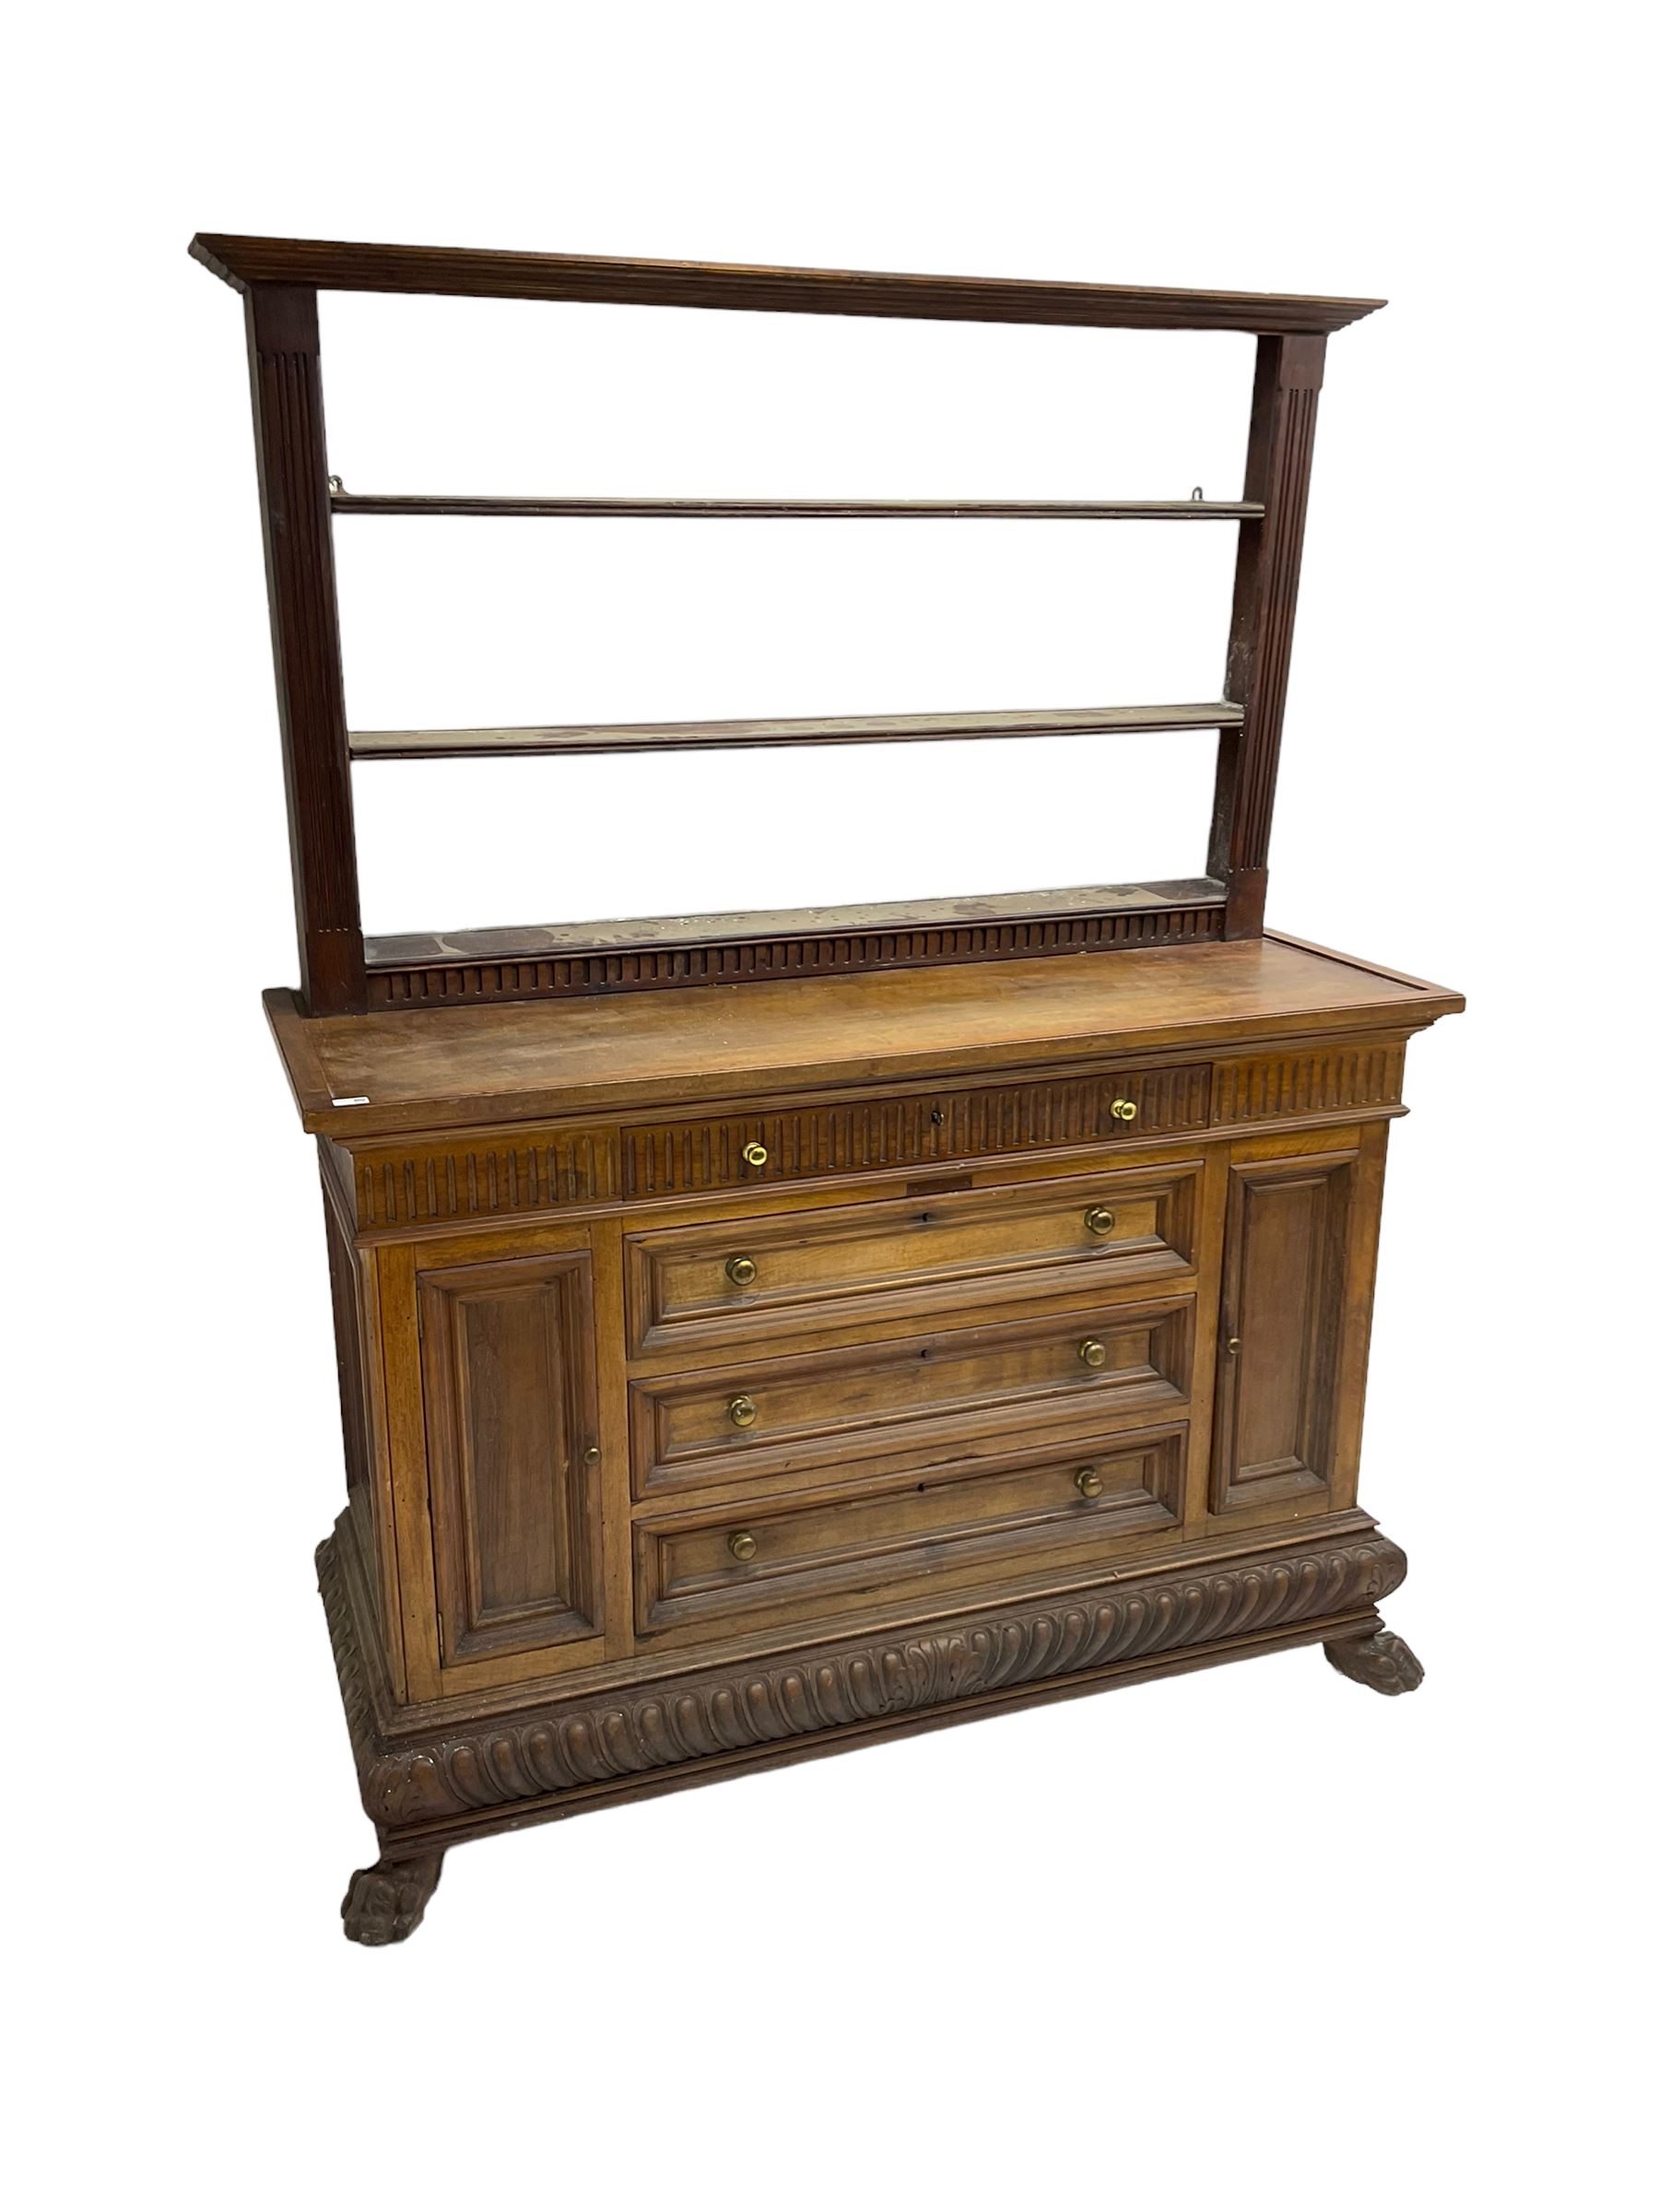 Early 20th century walnut side cabinet - Image 4 of 6